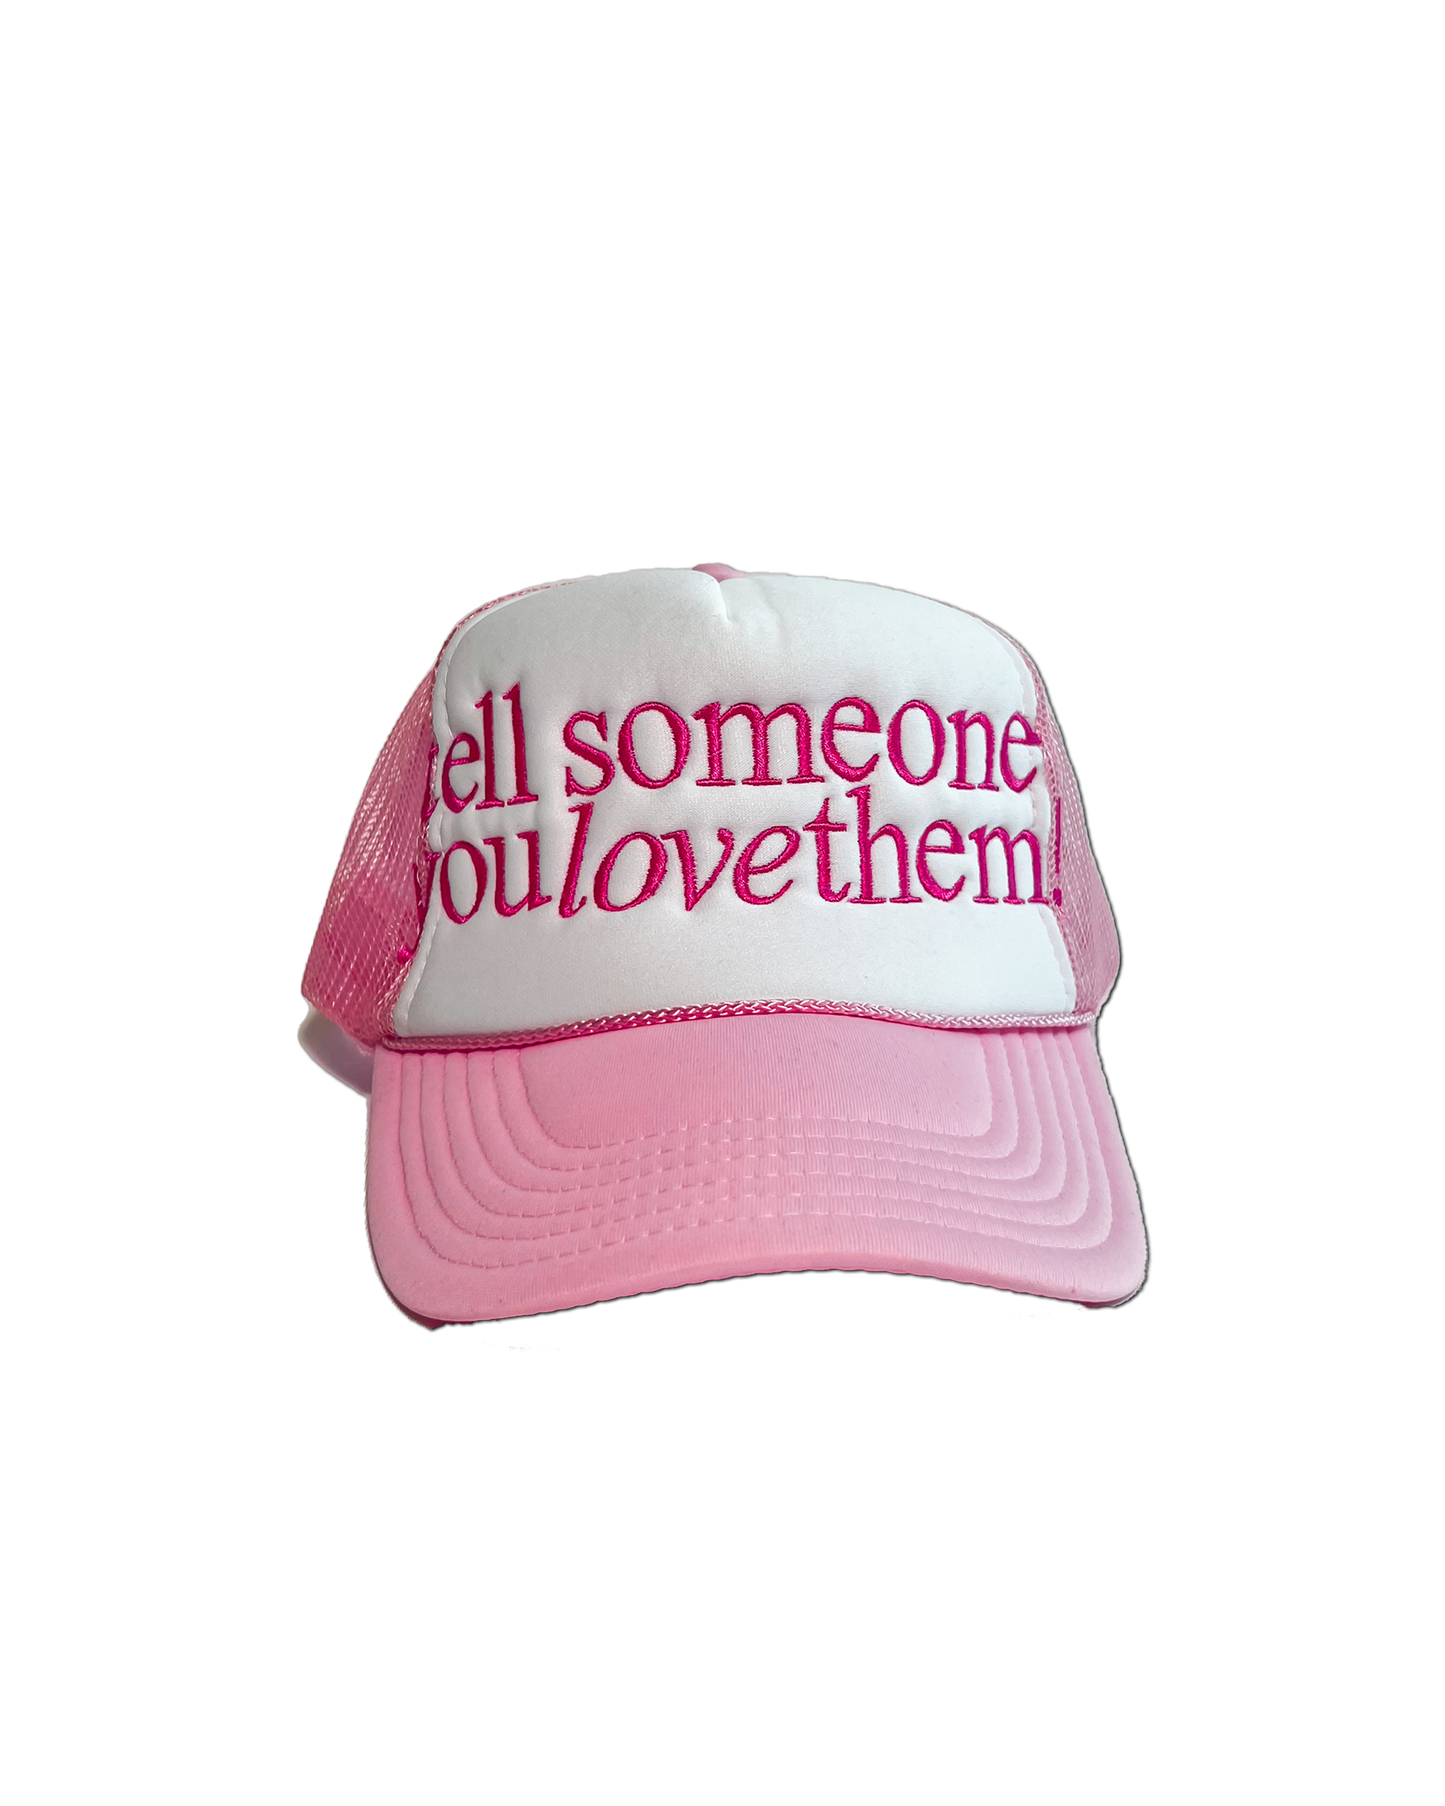 Tell Someone you Love Them Trucker Hat